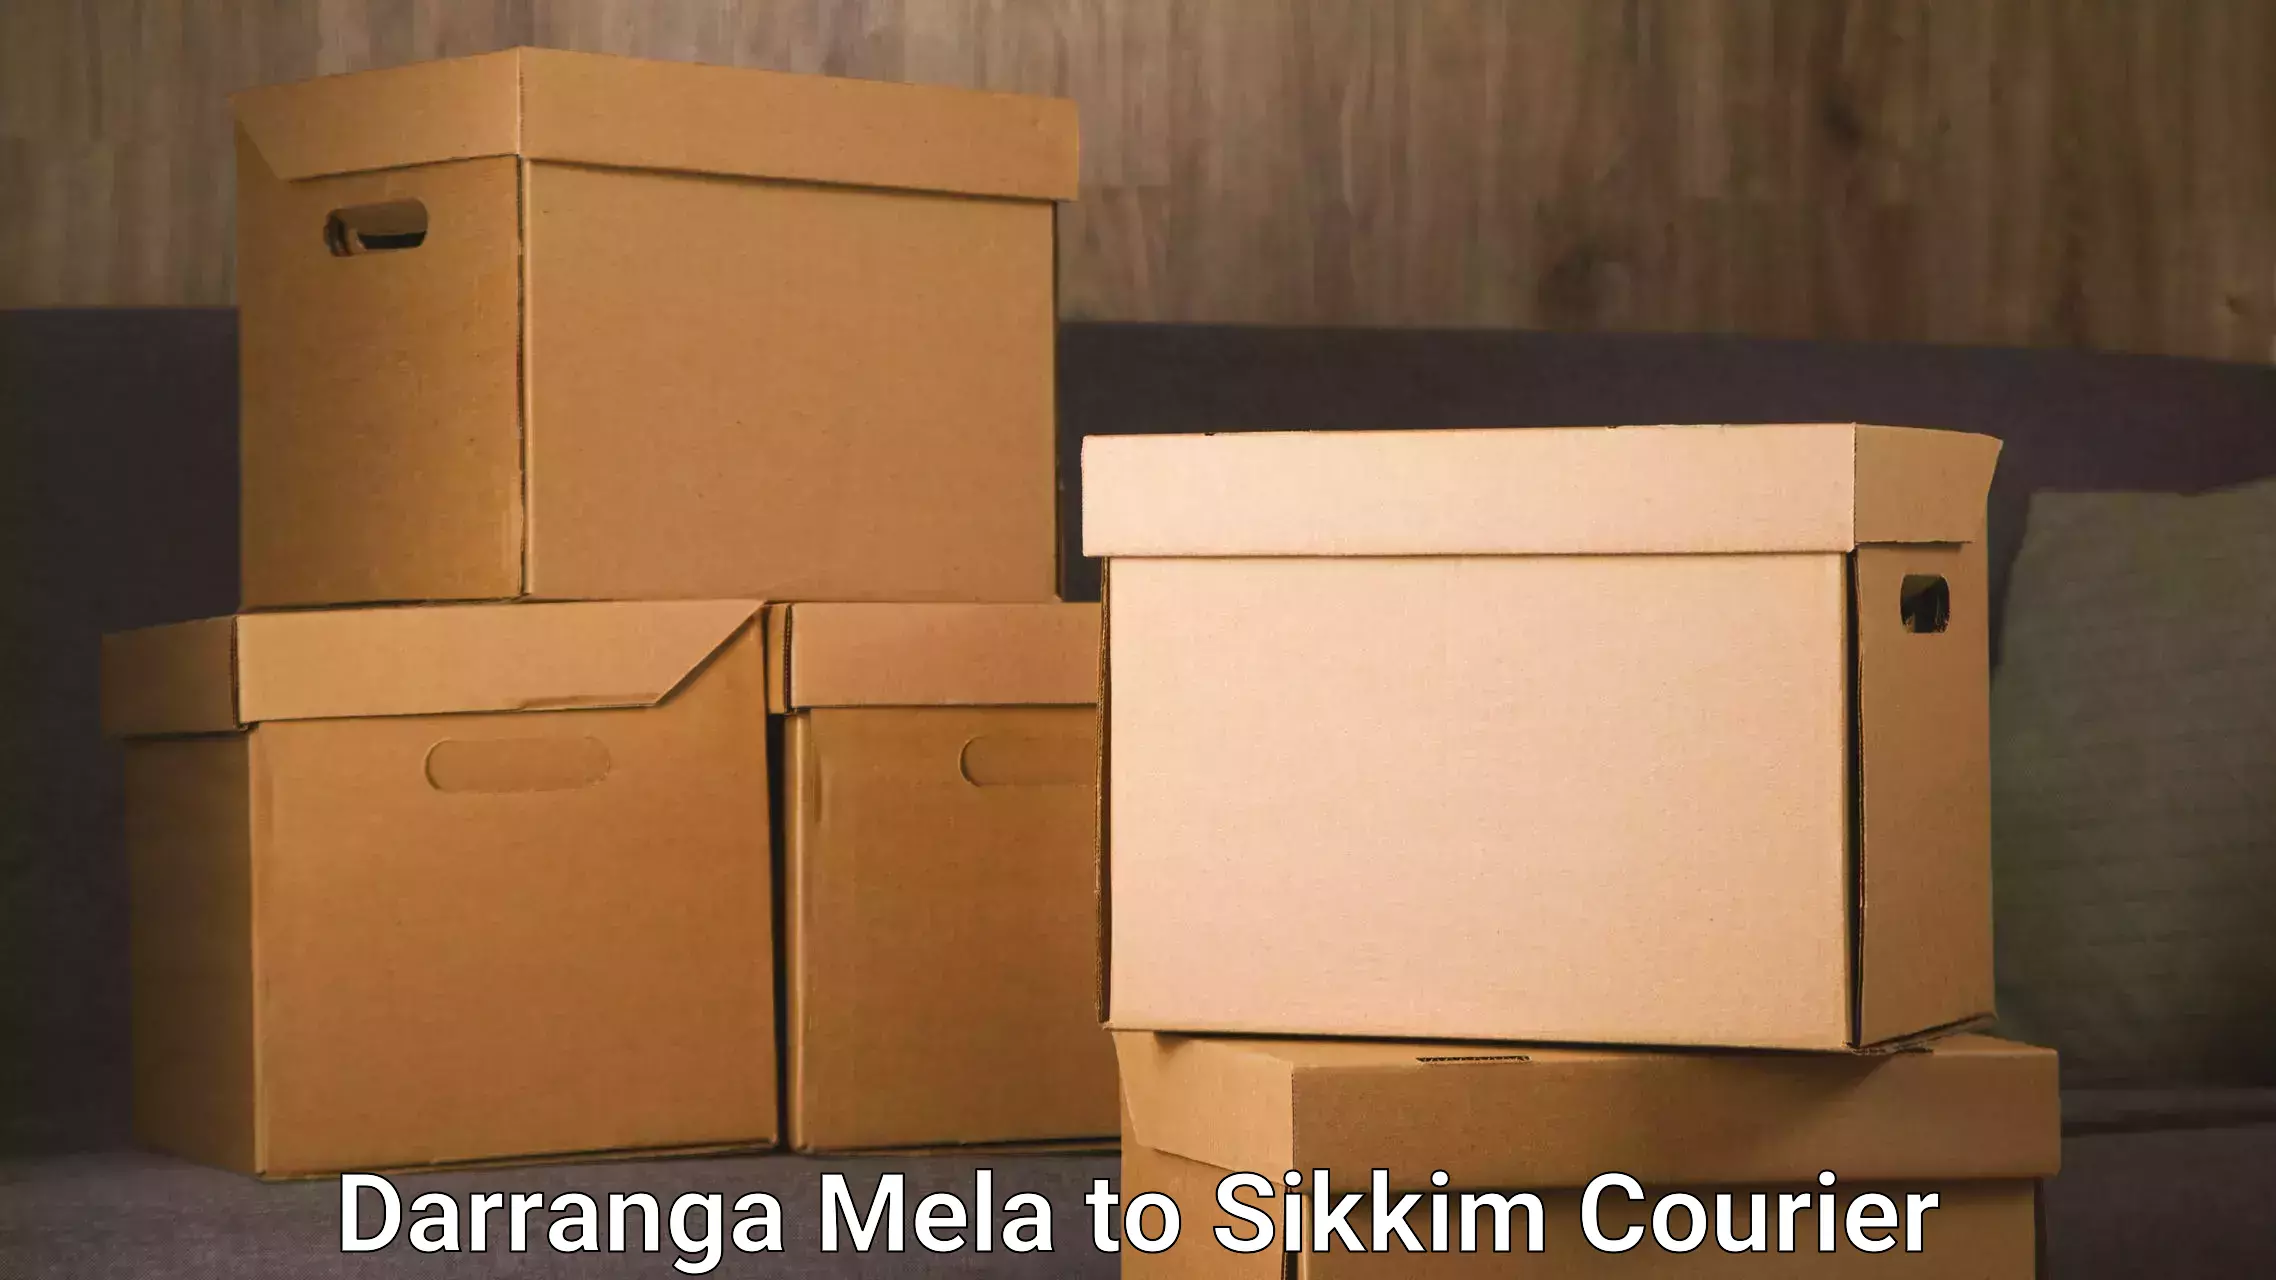 Reliable courier service in Darranga Mela to Rongli